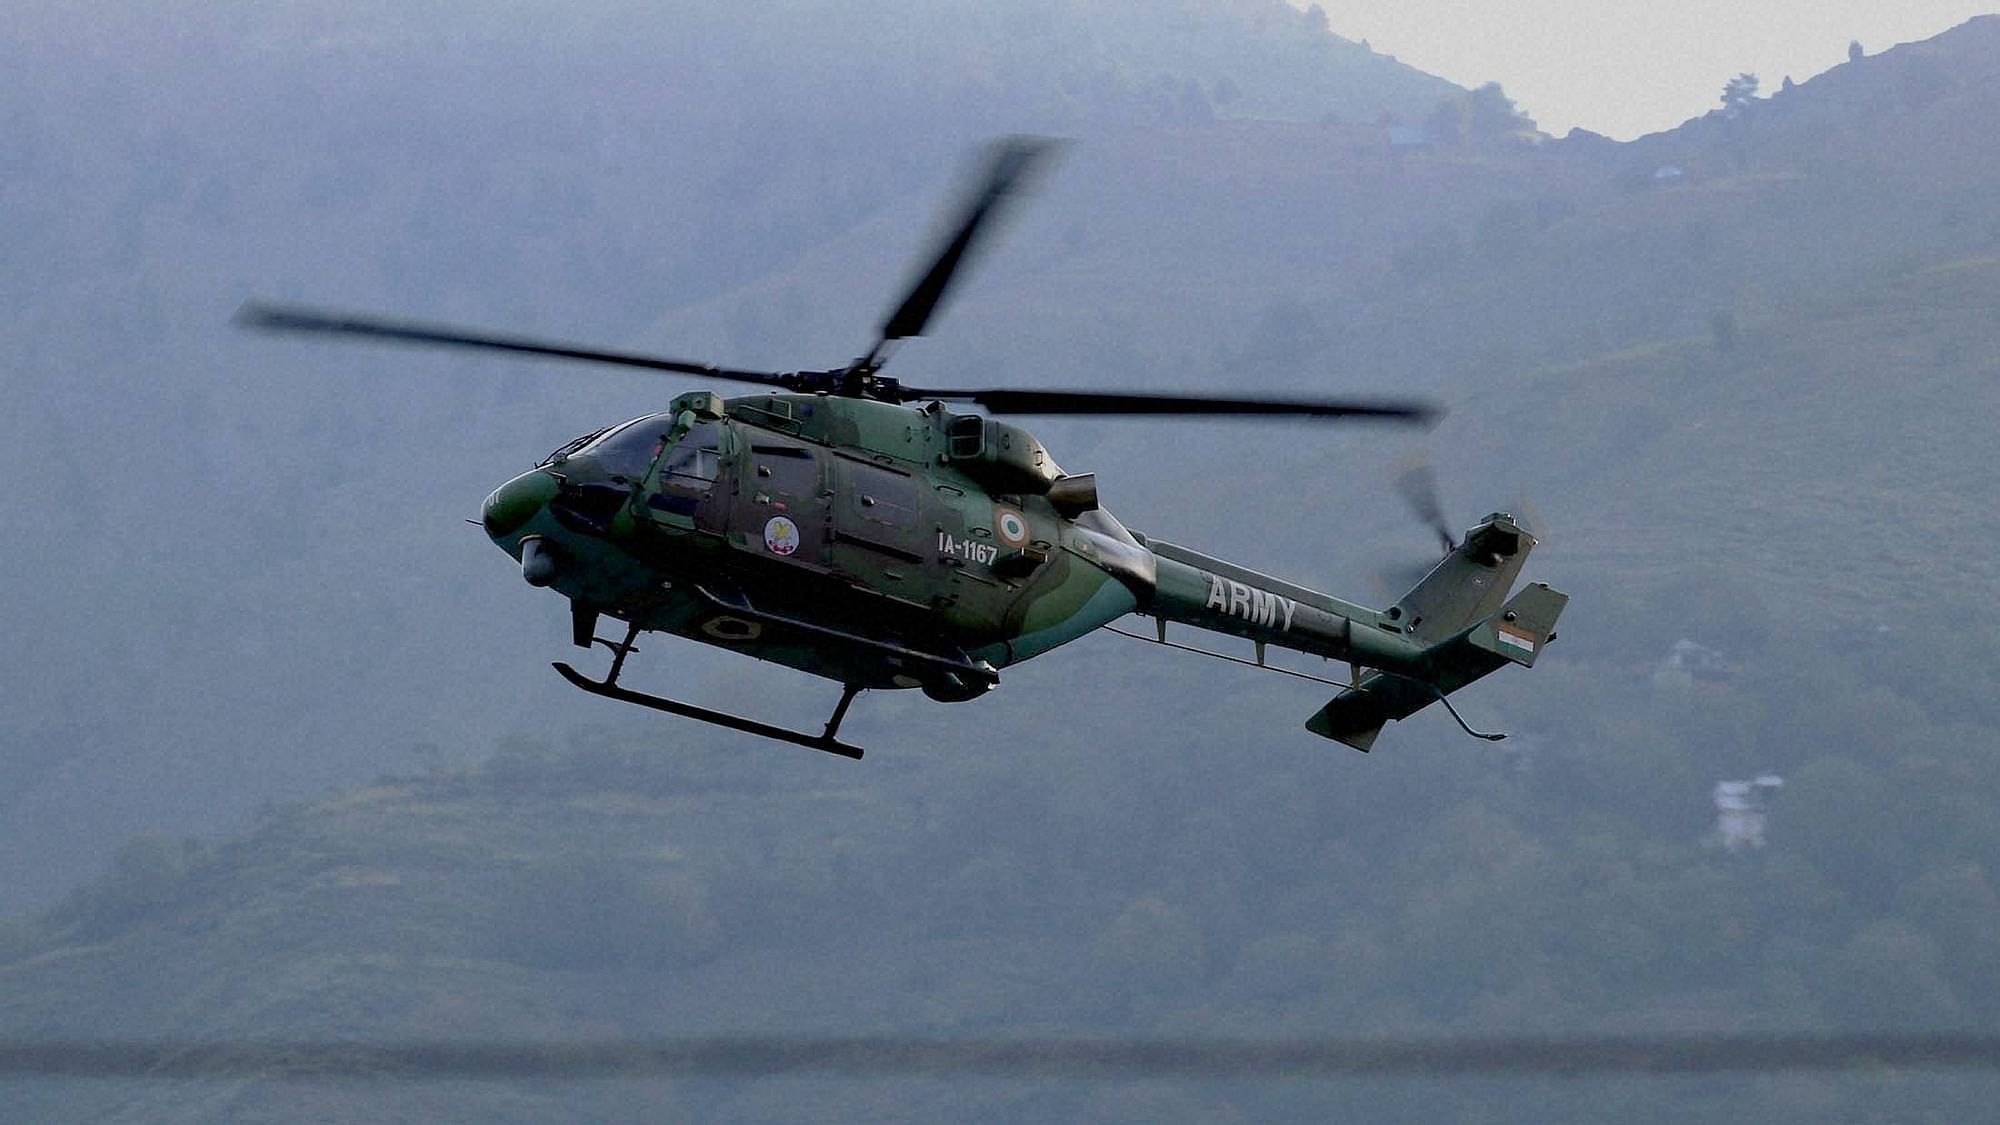 <div class="paragraphs"><p>A Cheetah helicopter of the Indian Army crashed near Mandala, west of Bomdila, in Arunachal Pradesh on Thursday, 16 March, a defence spokesperson confirmed. Image used for representative purpose.</p></div>